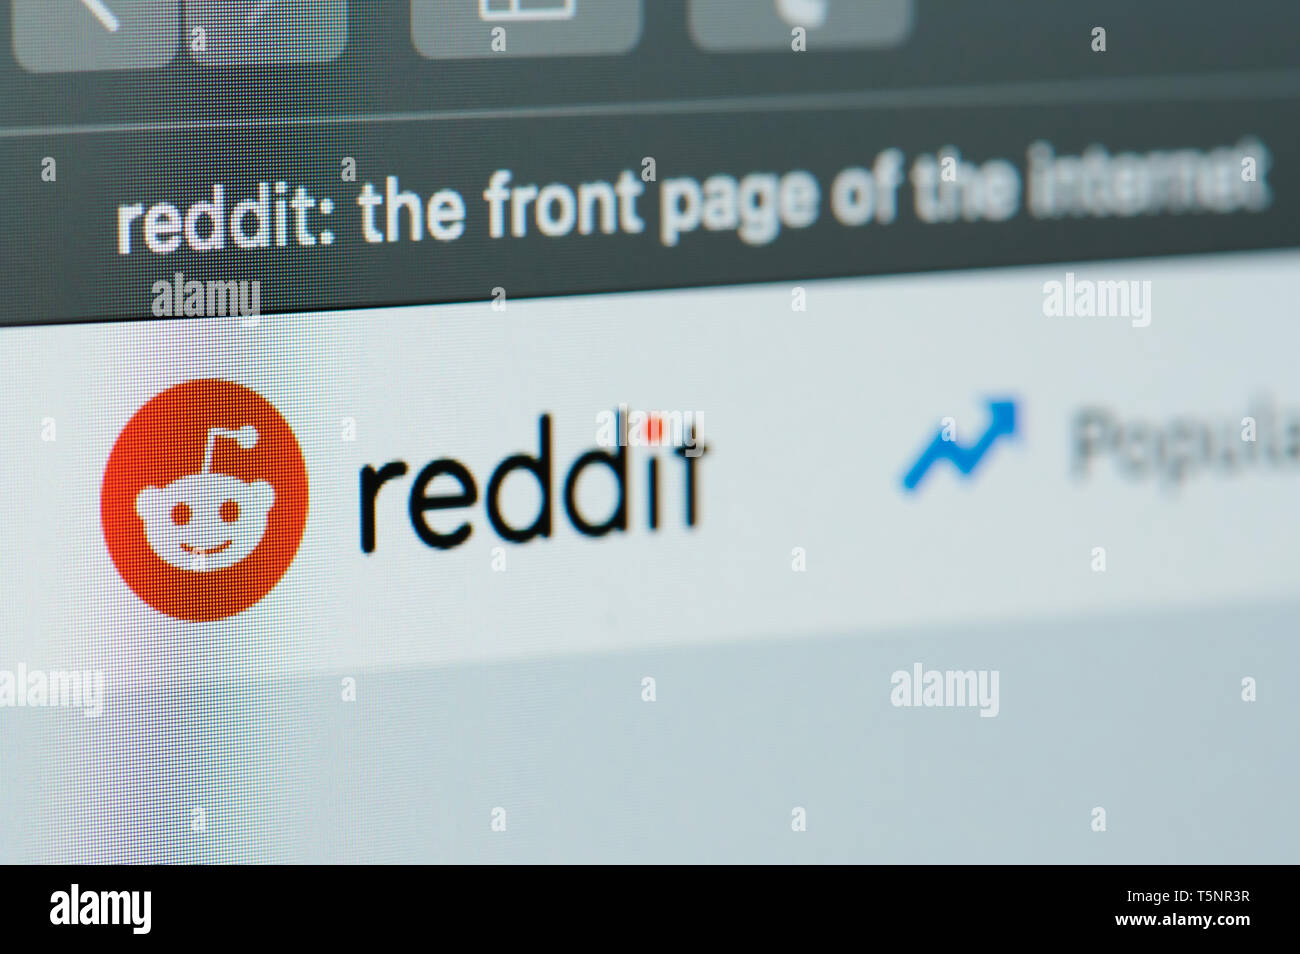 New york, USA - april 22, 2019: Reddit home page on laptop screen close up Stock Photo